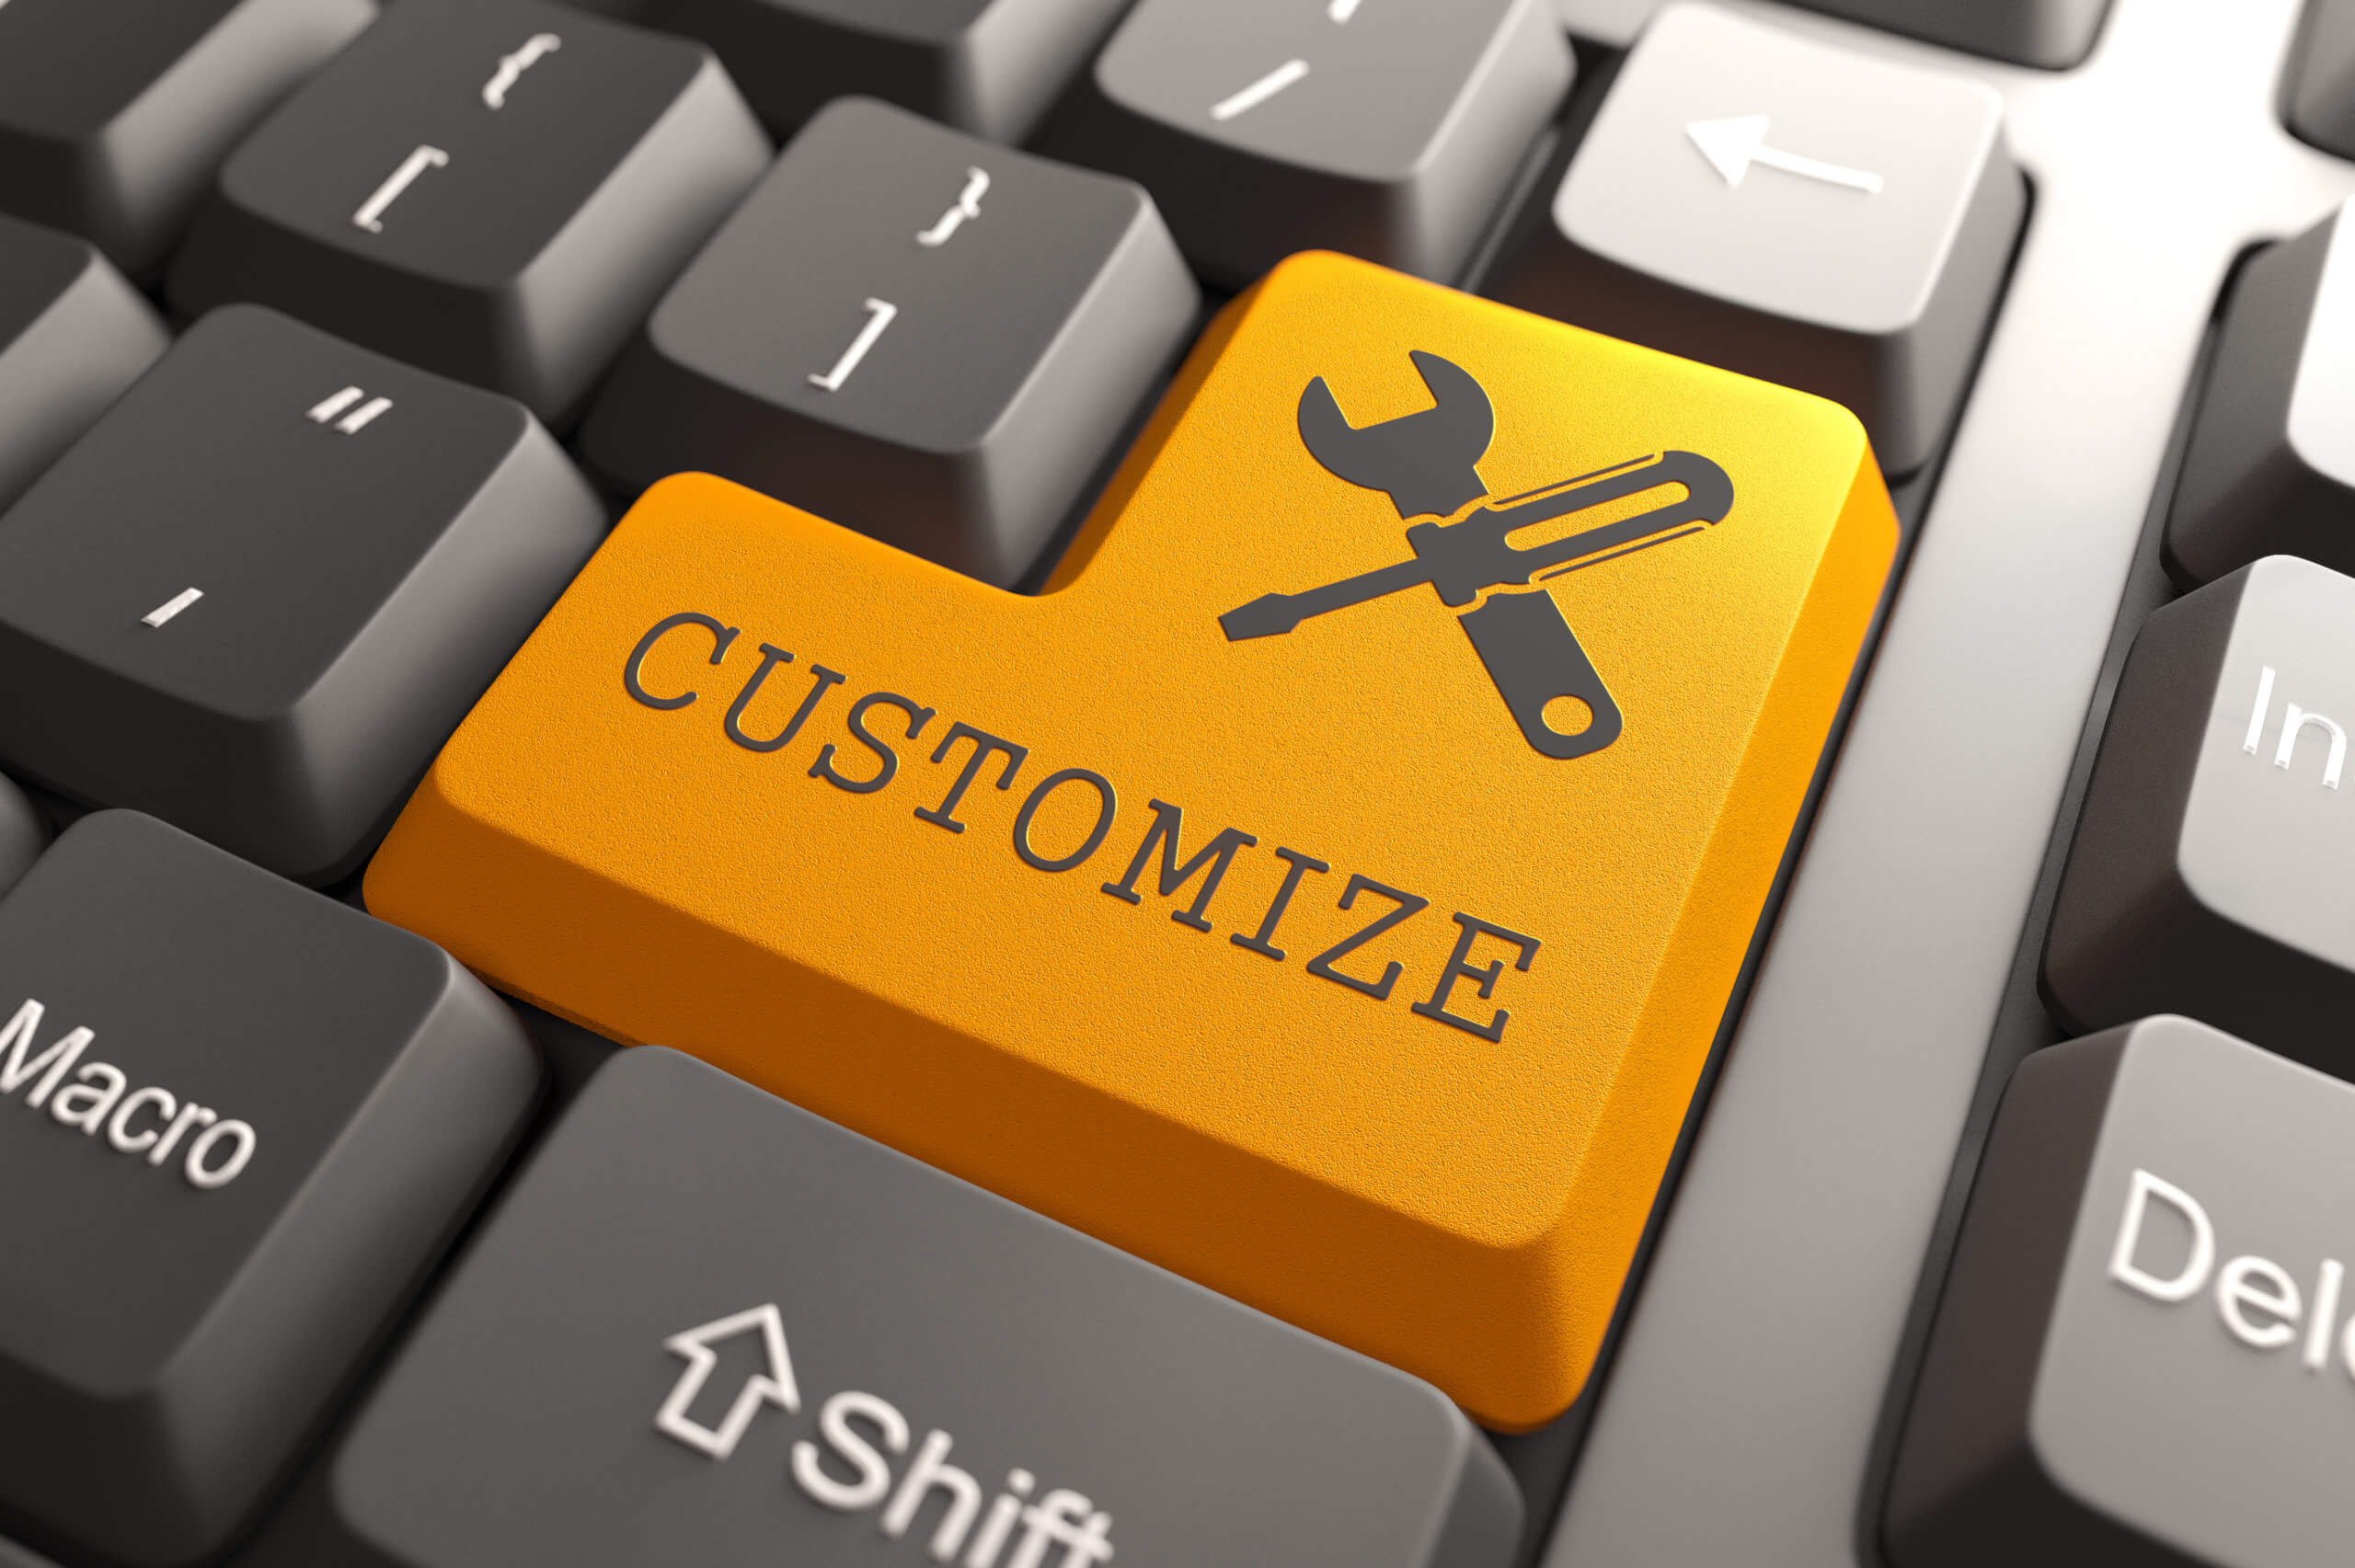 Top 5 Products You Can Customize for Personal Use